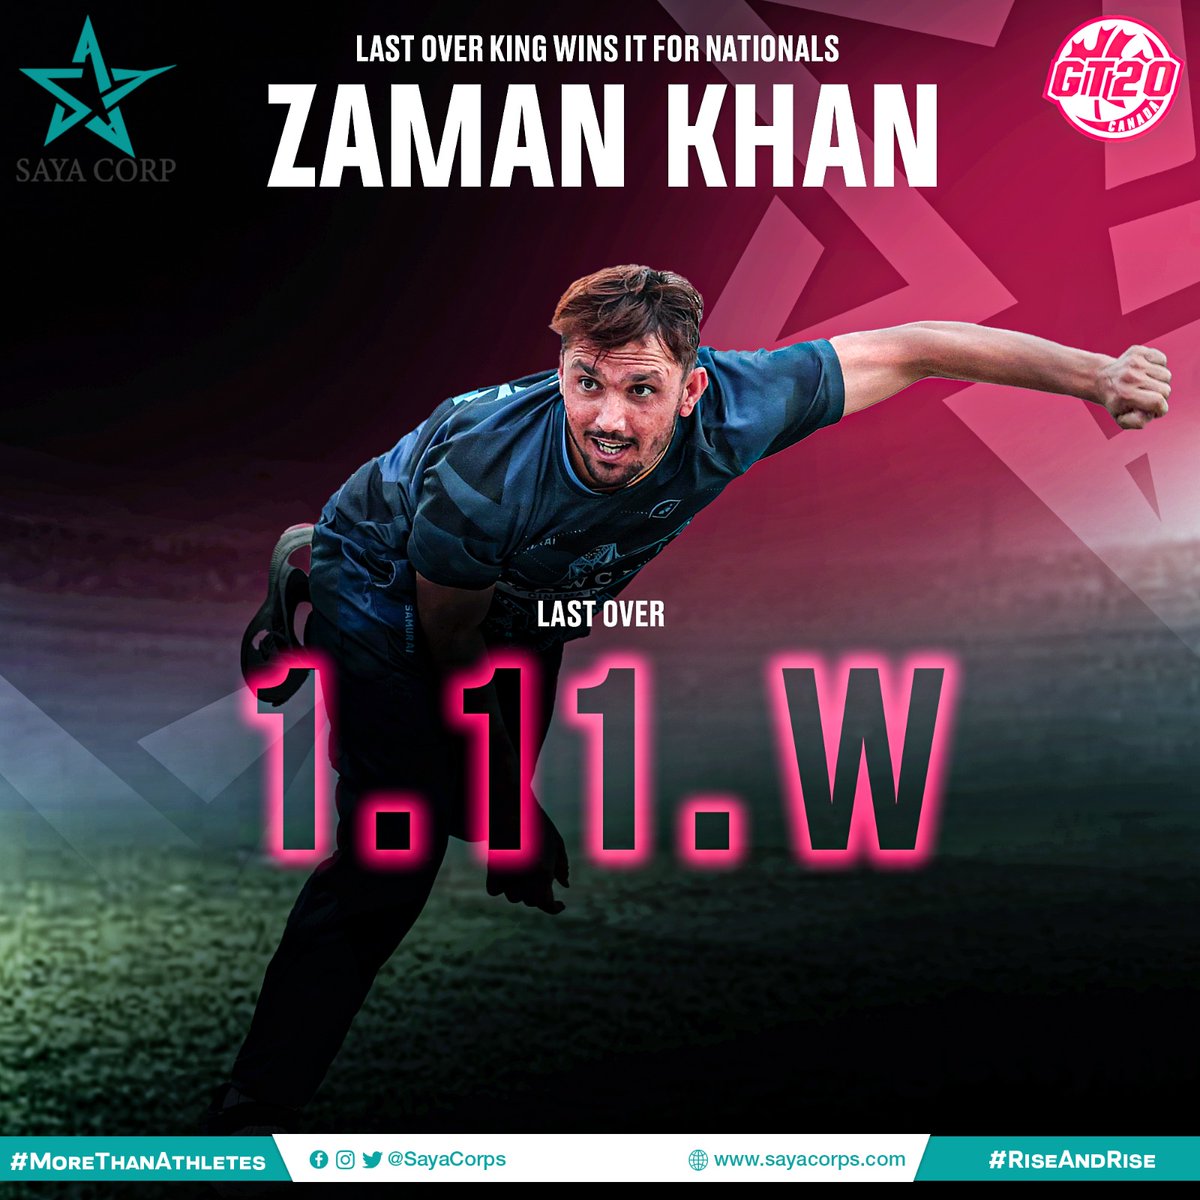 Yearning to win the match in the last over? 

✓ Bring Zaman Khan into the ball and he will be no less than a savior!

His last over was 1️⃣0️⃣1️⃣1️⃣0️⃣W 

#SayaCorporation's @ZamanKhanPak has done it once again!

#MoreThanAthletes #RiseAndRise @TalhaAisham #ViratKohli𓃵